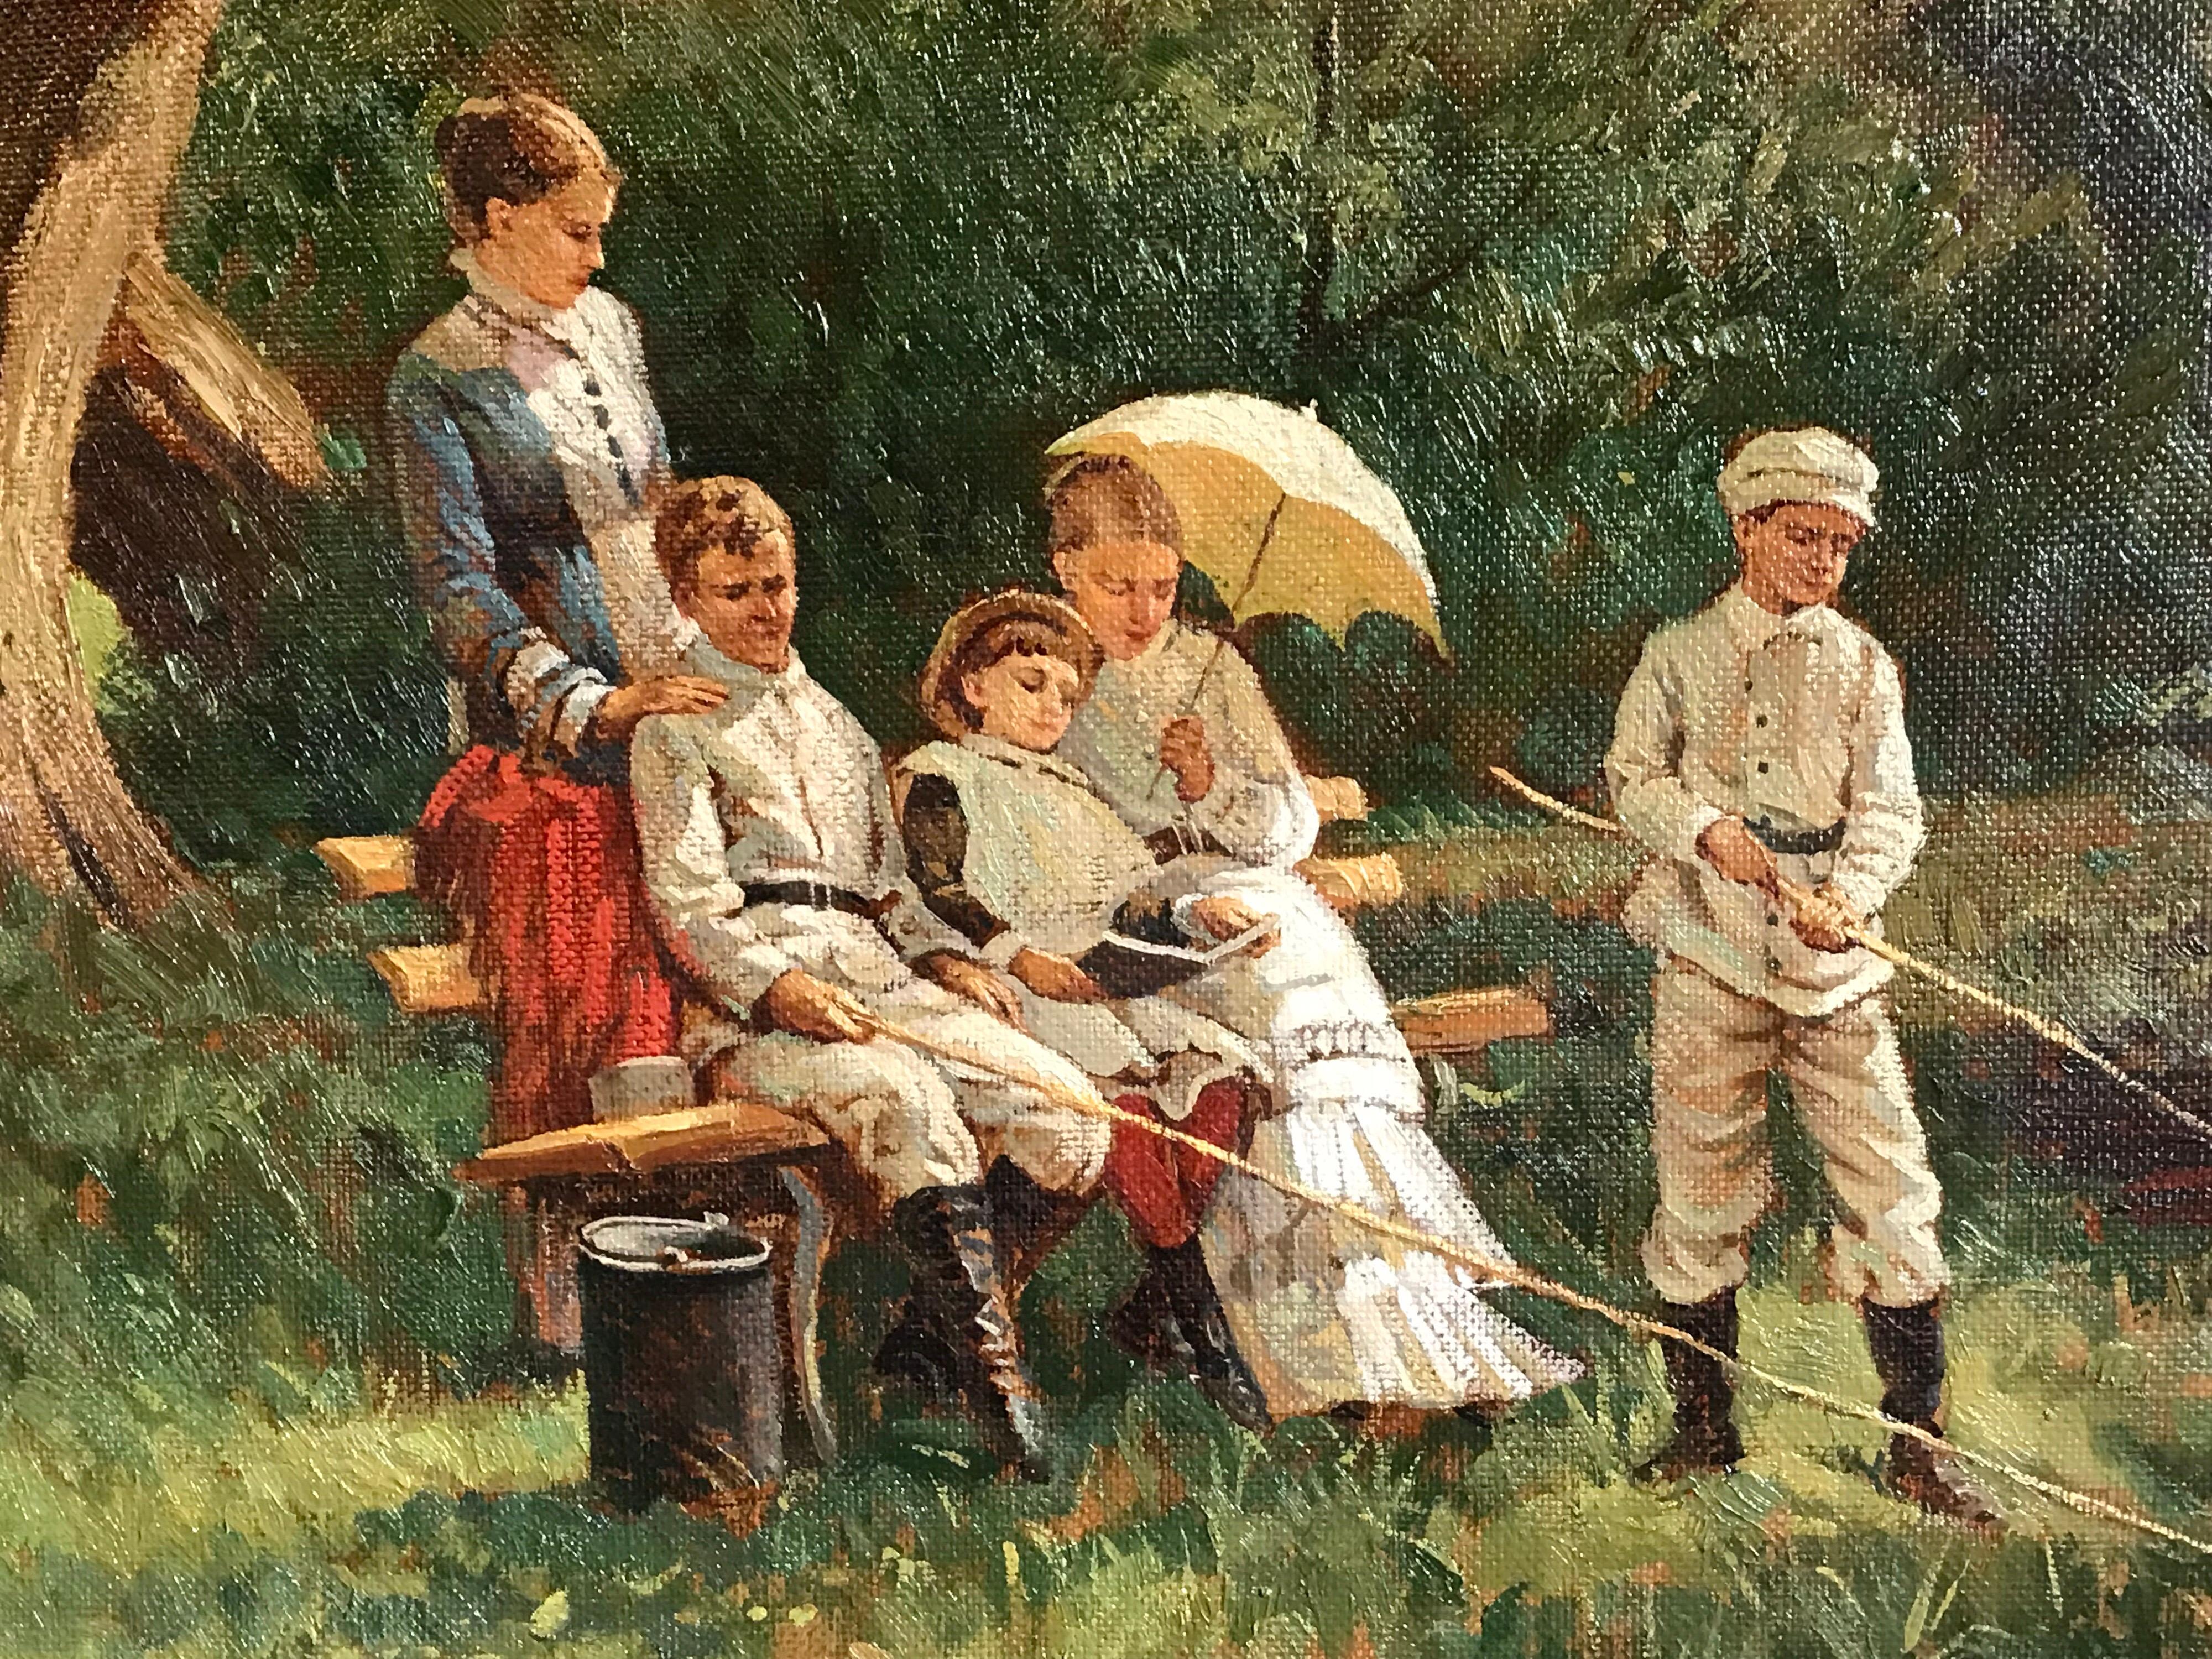 The Young Anglers
Russian School, 20th century
oil painting on canvas, unframed
18 x 26 inches

provenance: private European collection

Superb quality Russian oil painting depicting a young party of anglers on the river bank. The children and